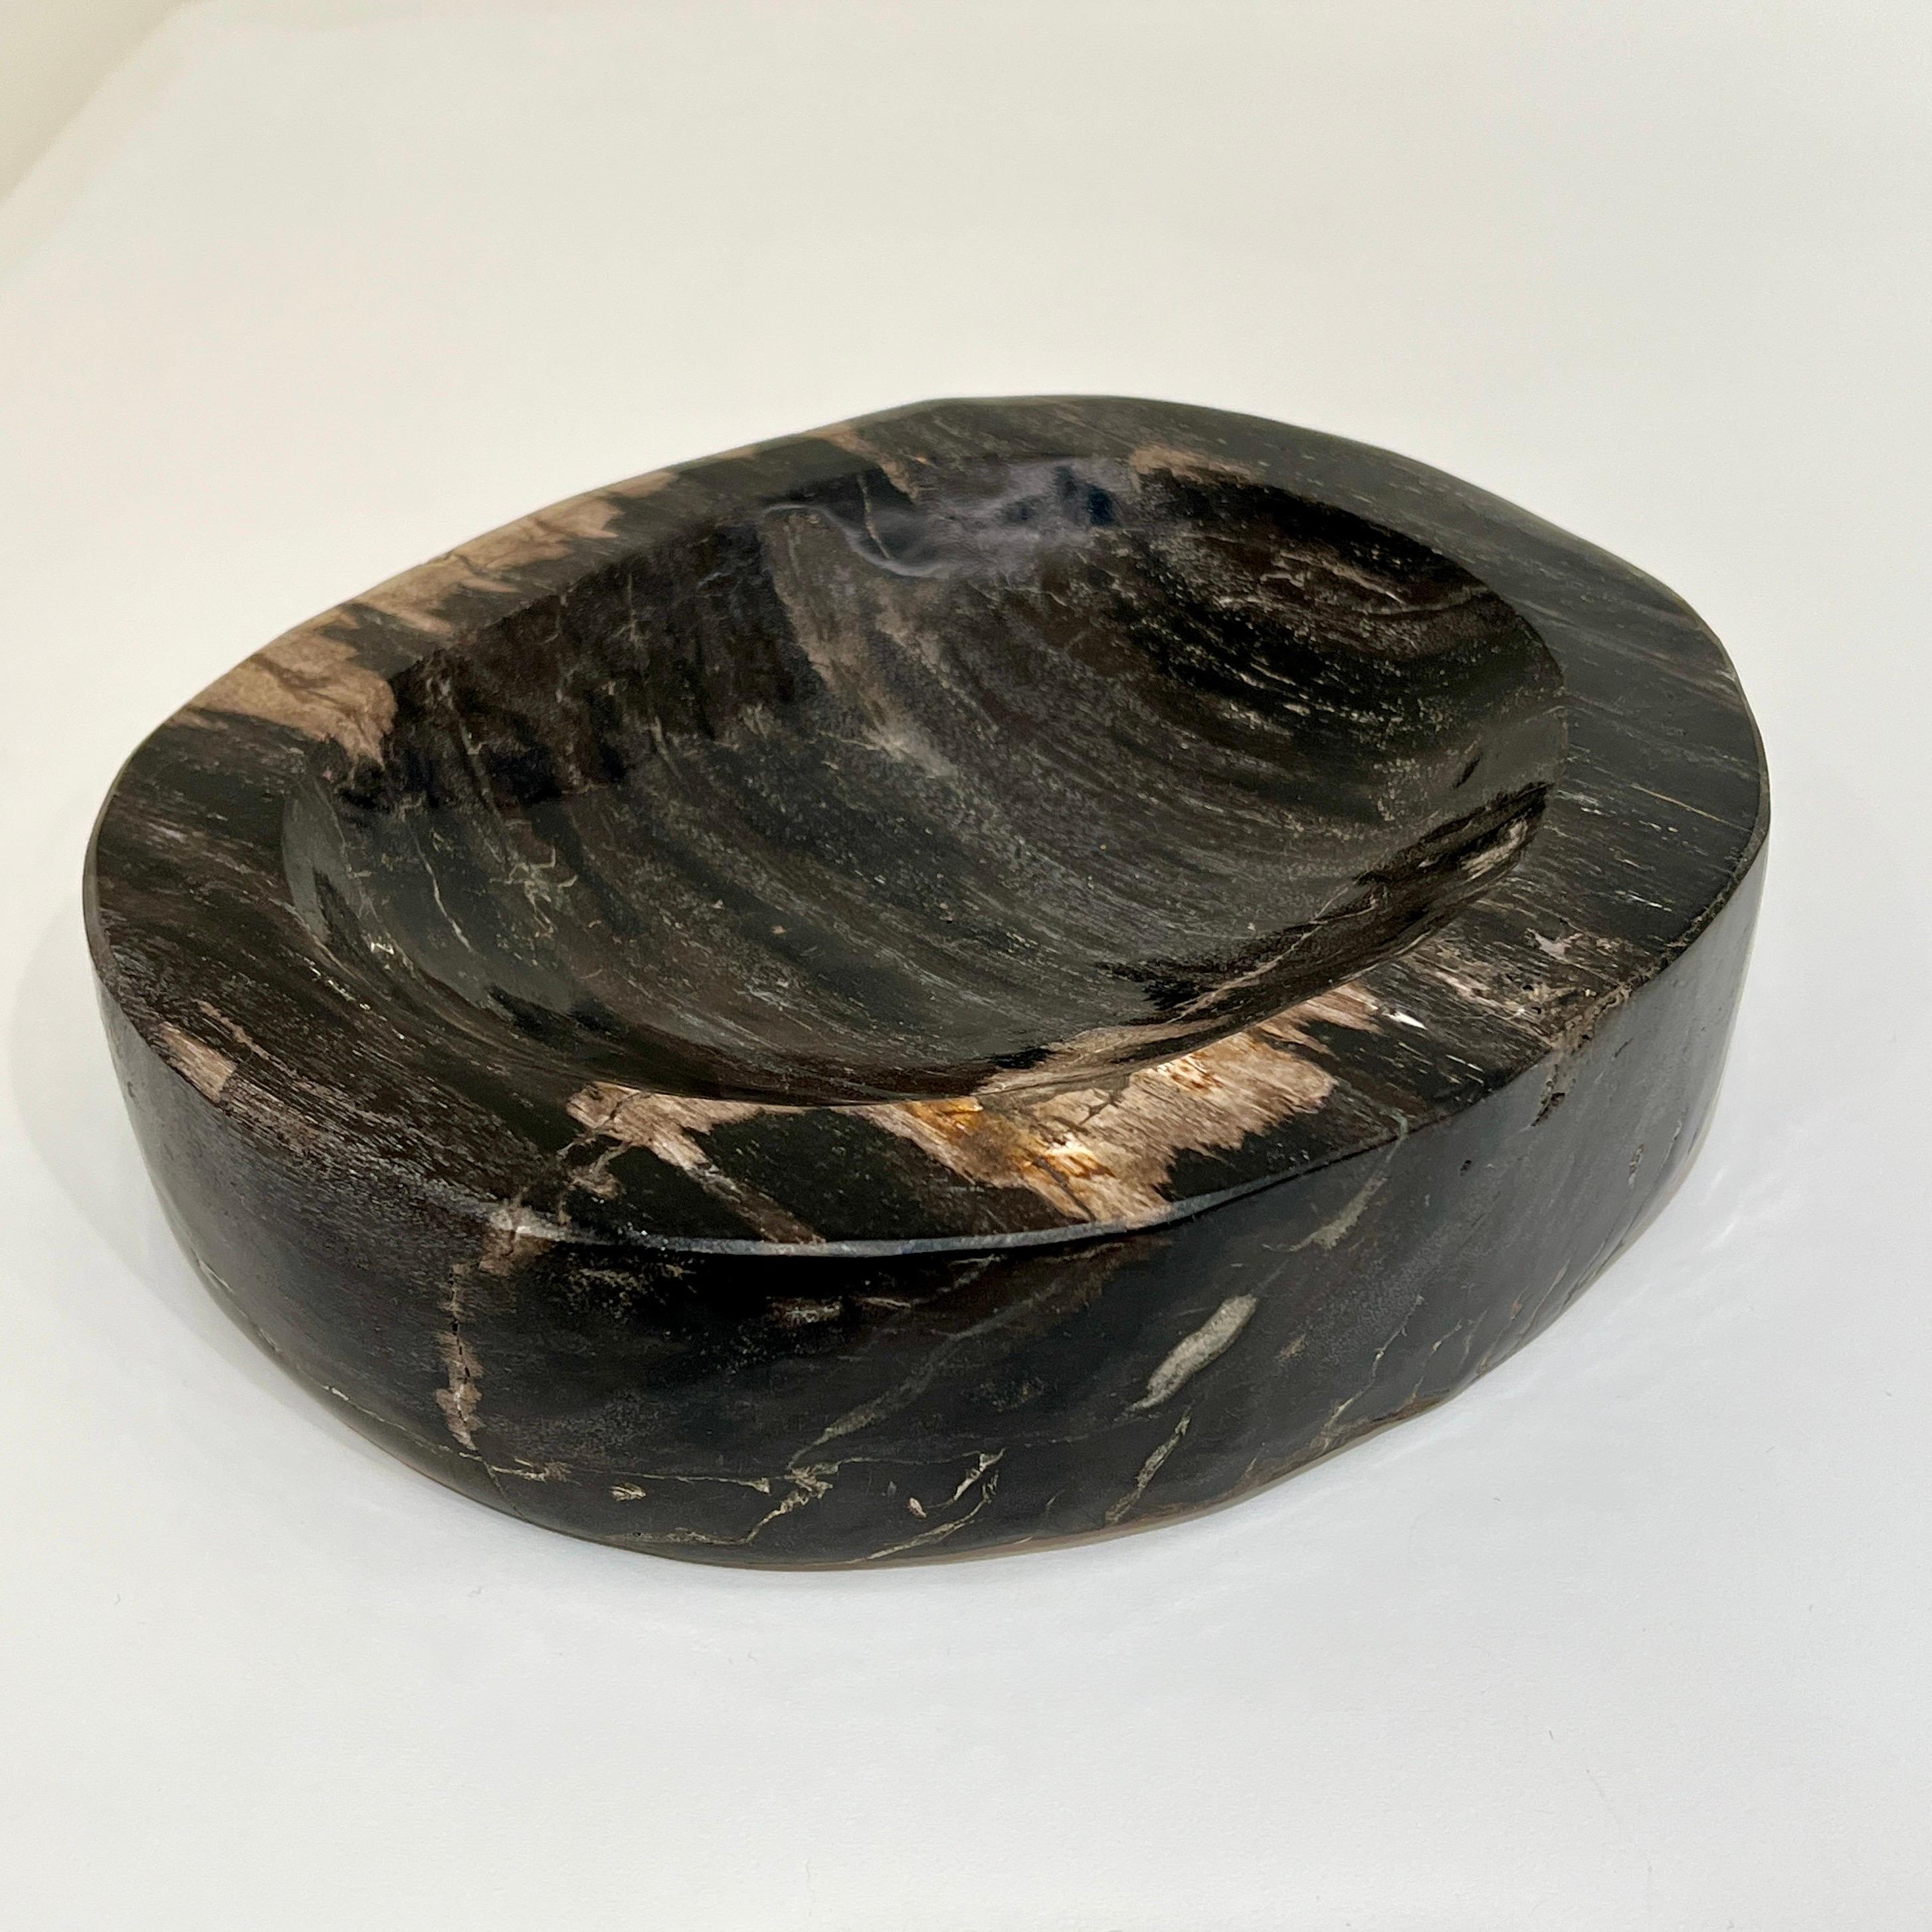 Organic Modern Petrified Wood Bowl in Black and Beige from Indonesia For Sale